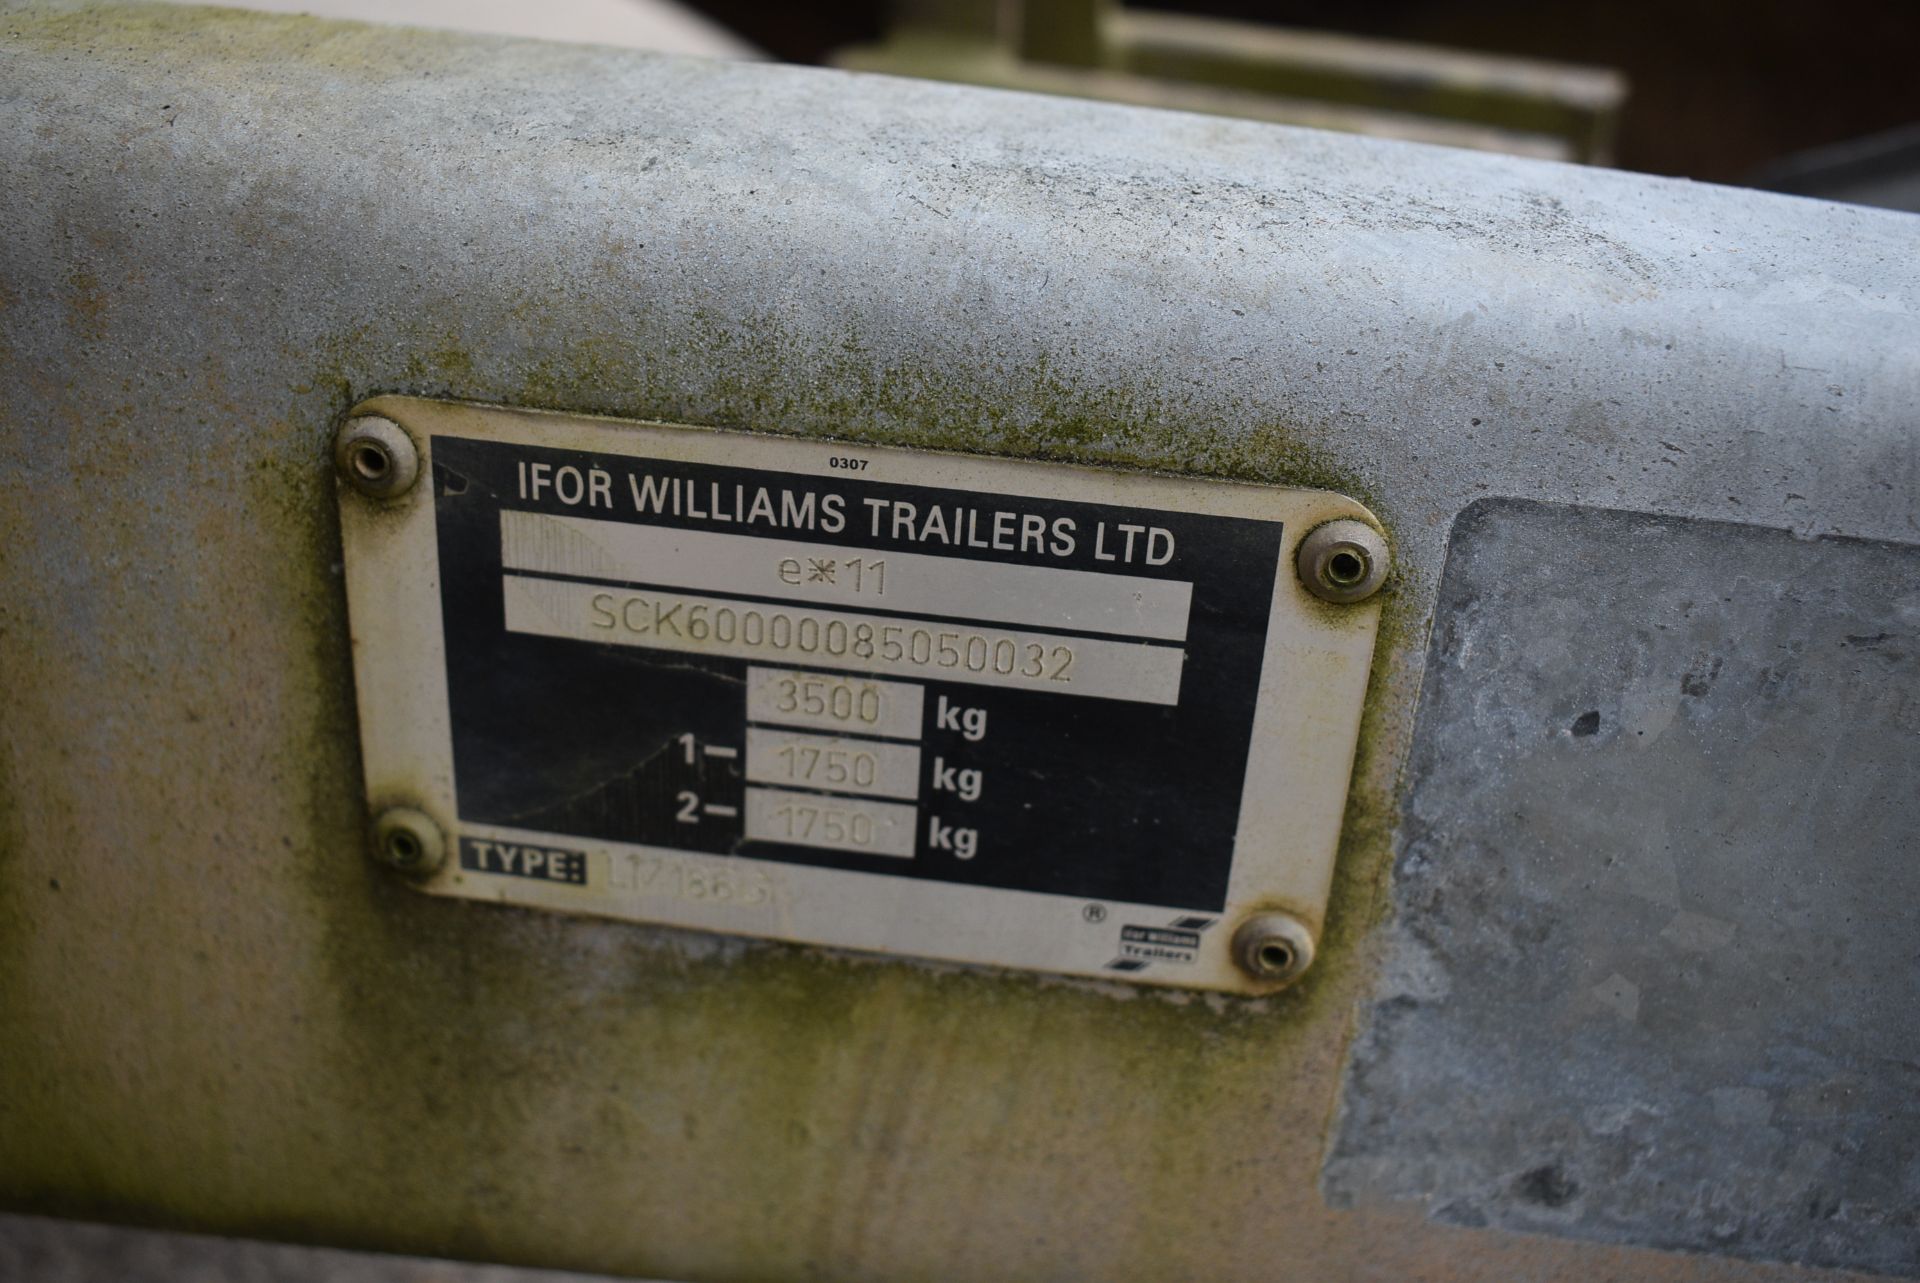 *Ifor Williams Twin Axle Drop Size Trailer with 18x6ft Body on 50mm Ball Hitch Serial No. S*42263 - Image 4 of 6